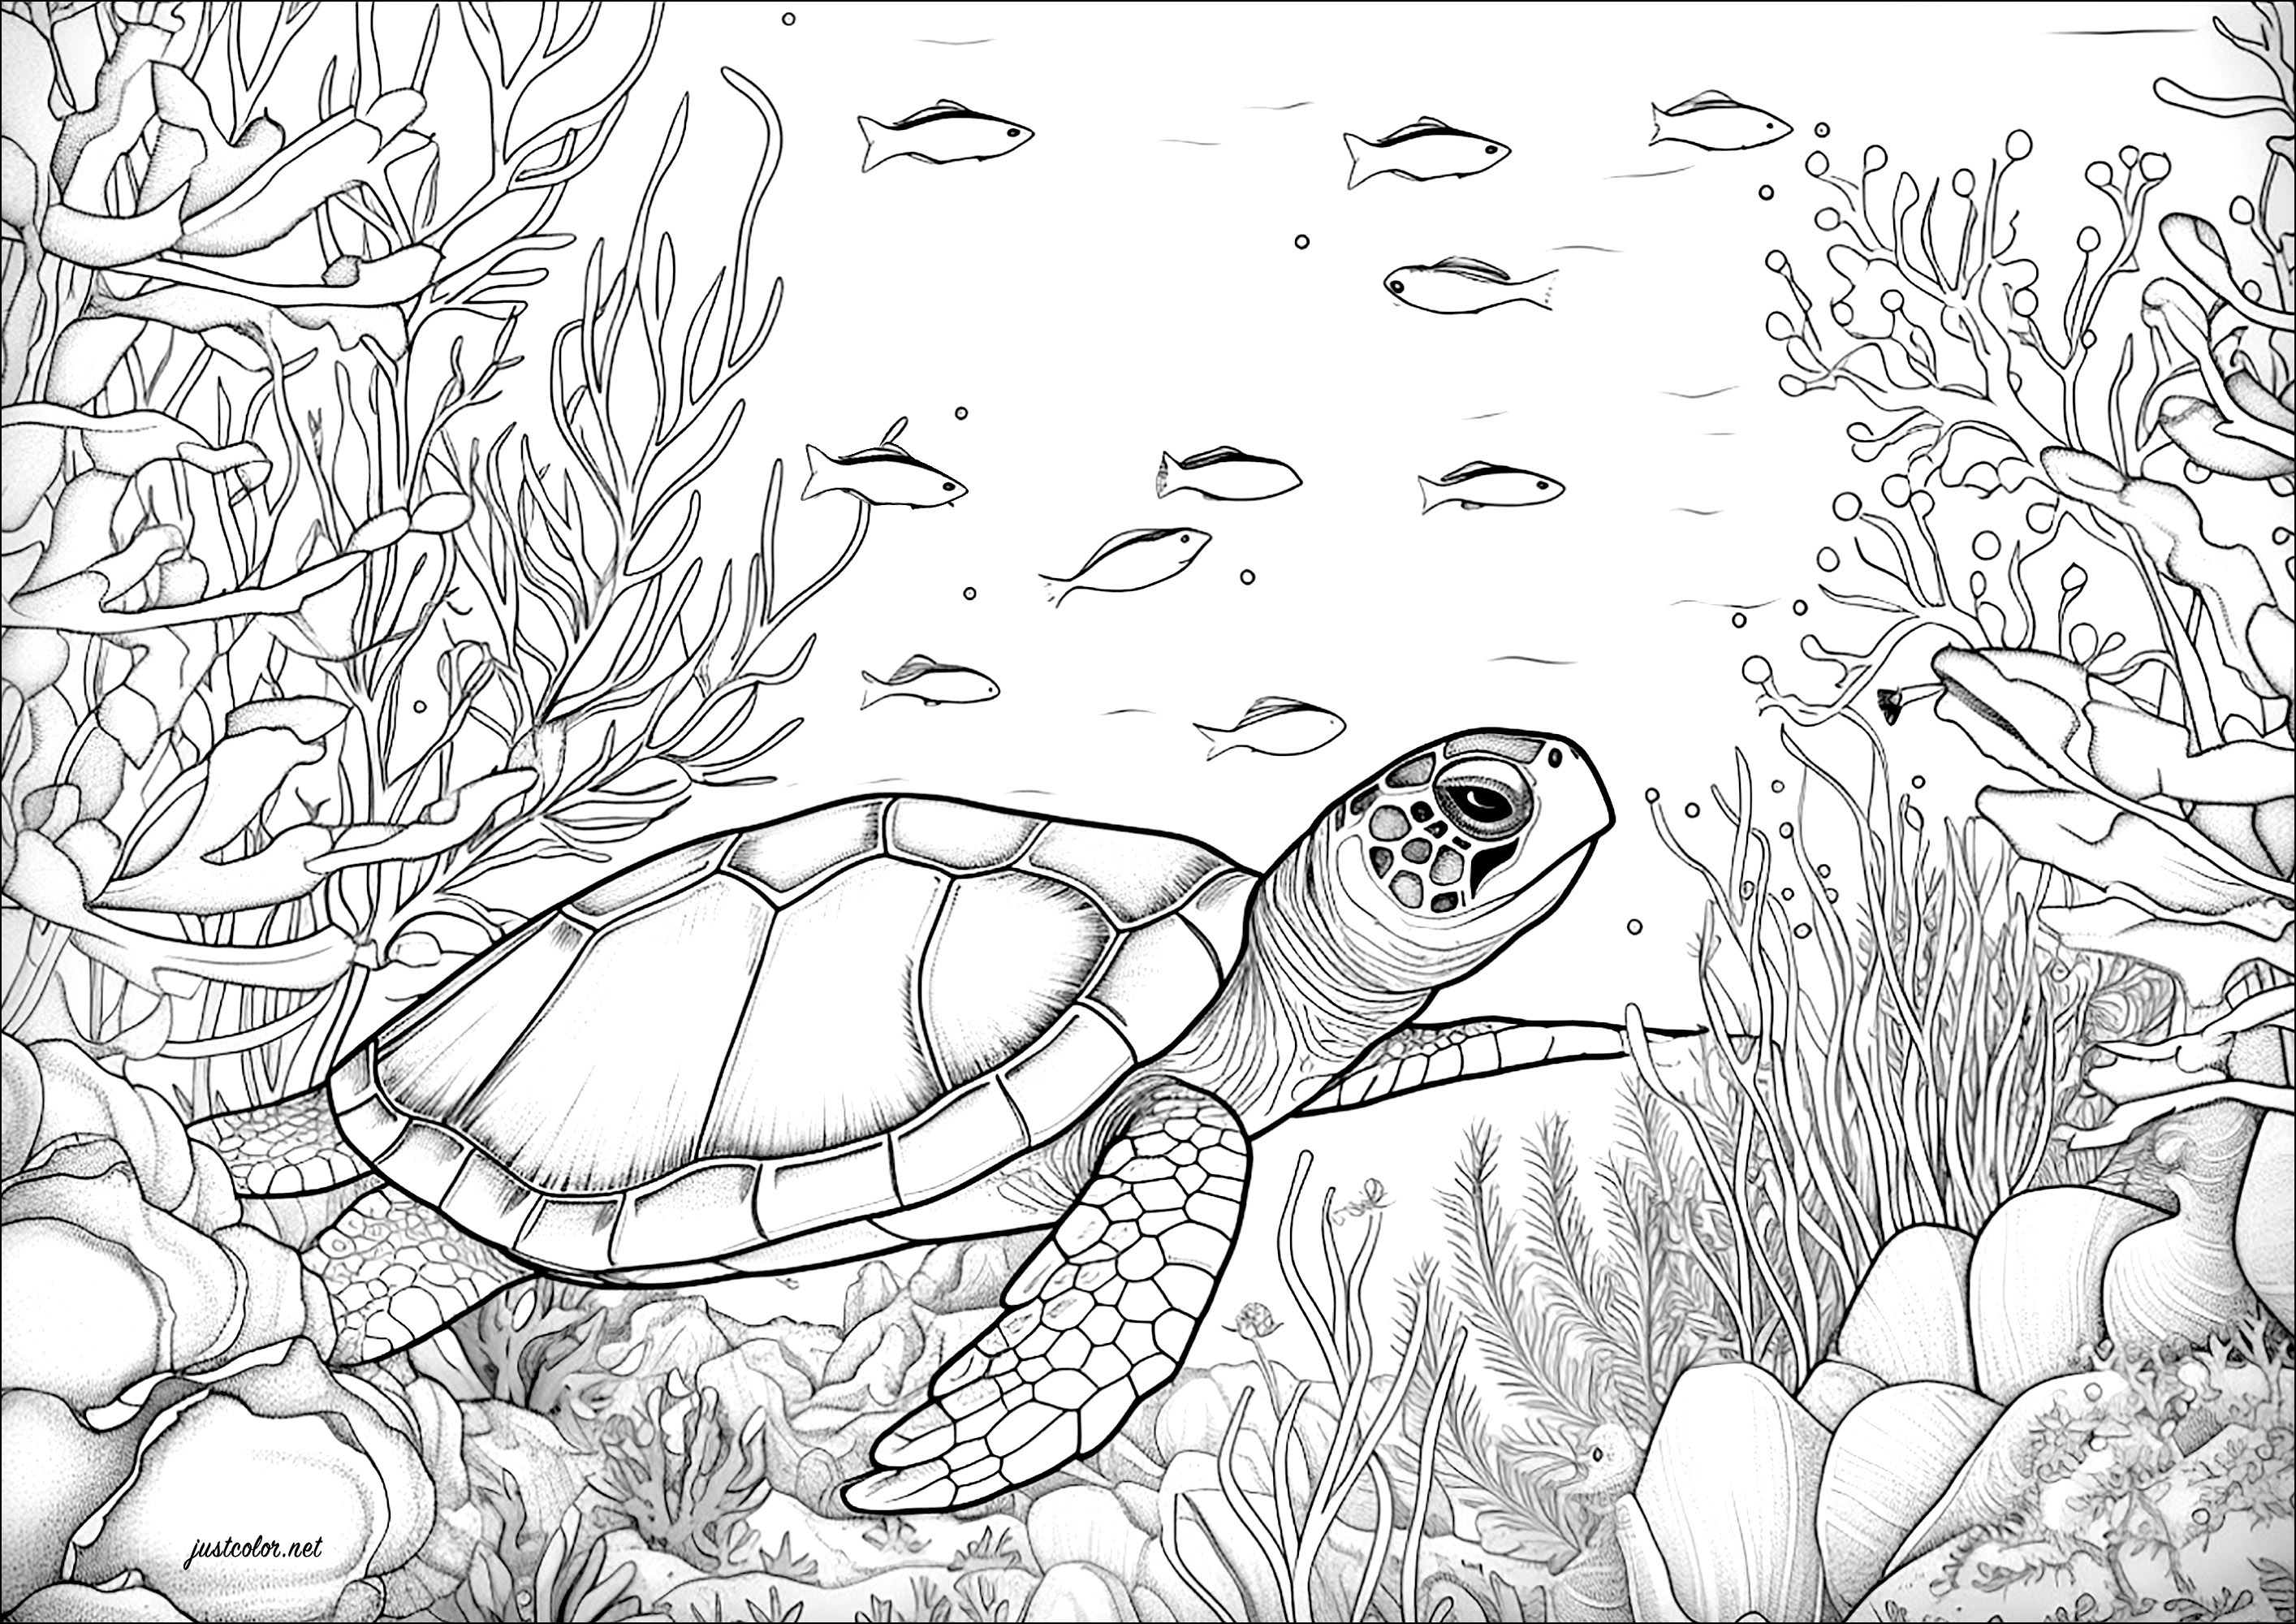 Turtle swimming with fish. Lots of details to color in corals and seaweed